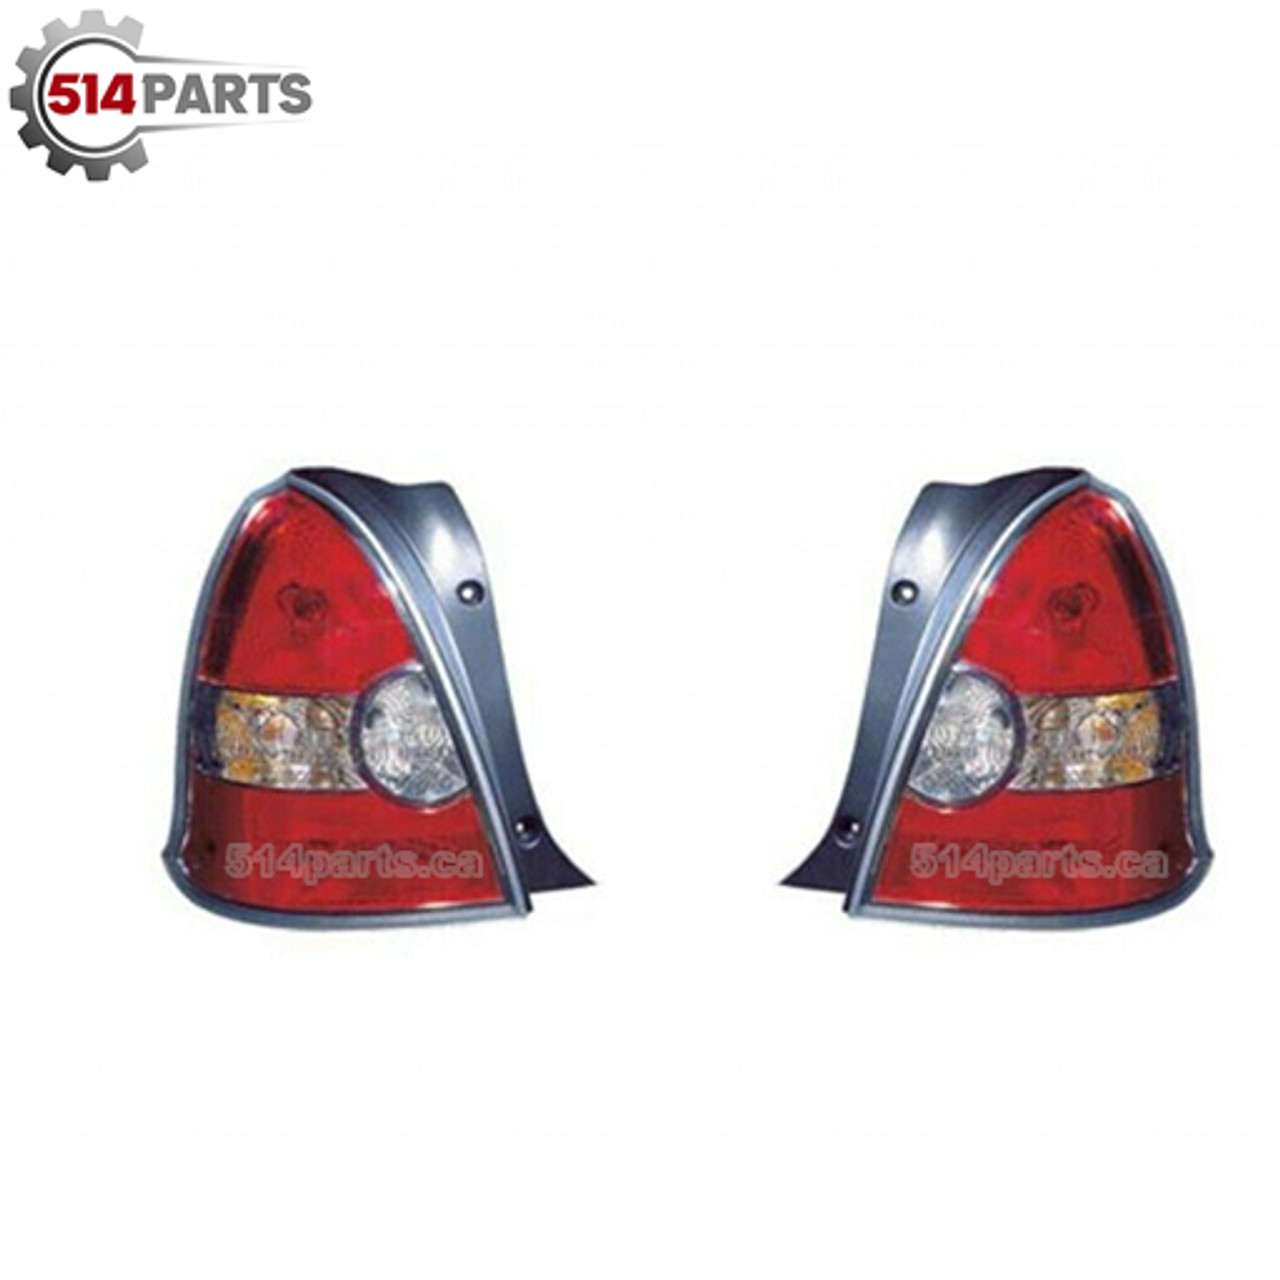 2008 - 2011 HYUNDAI ACCENT HATCHBACK TAIL LIGHTS - PHARES ARRIERE